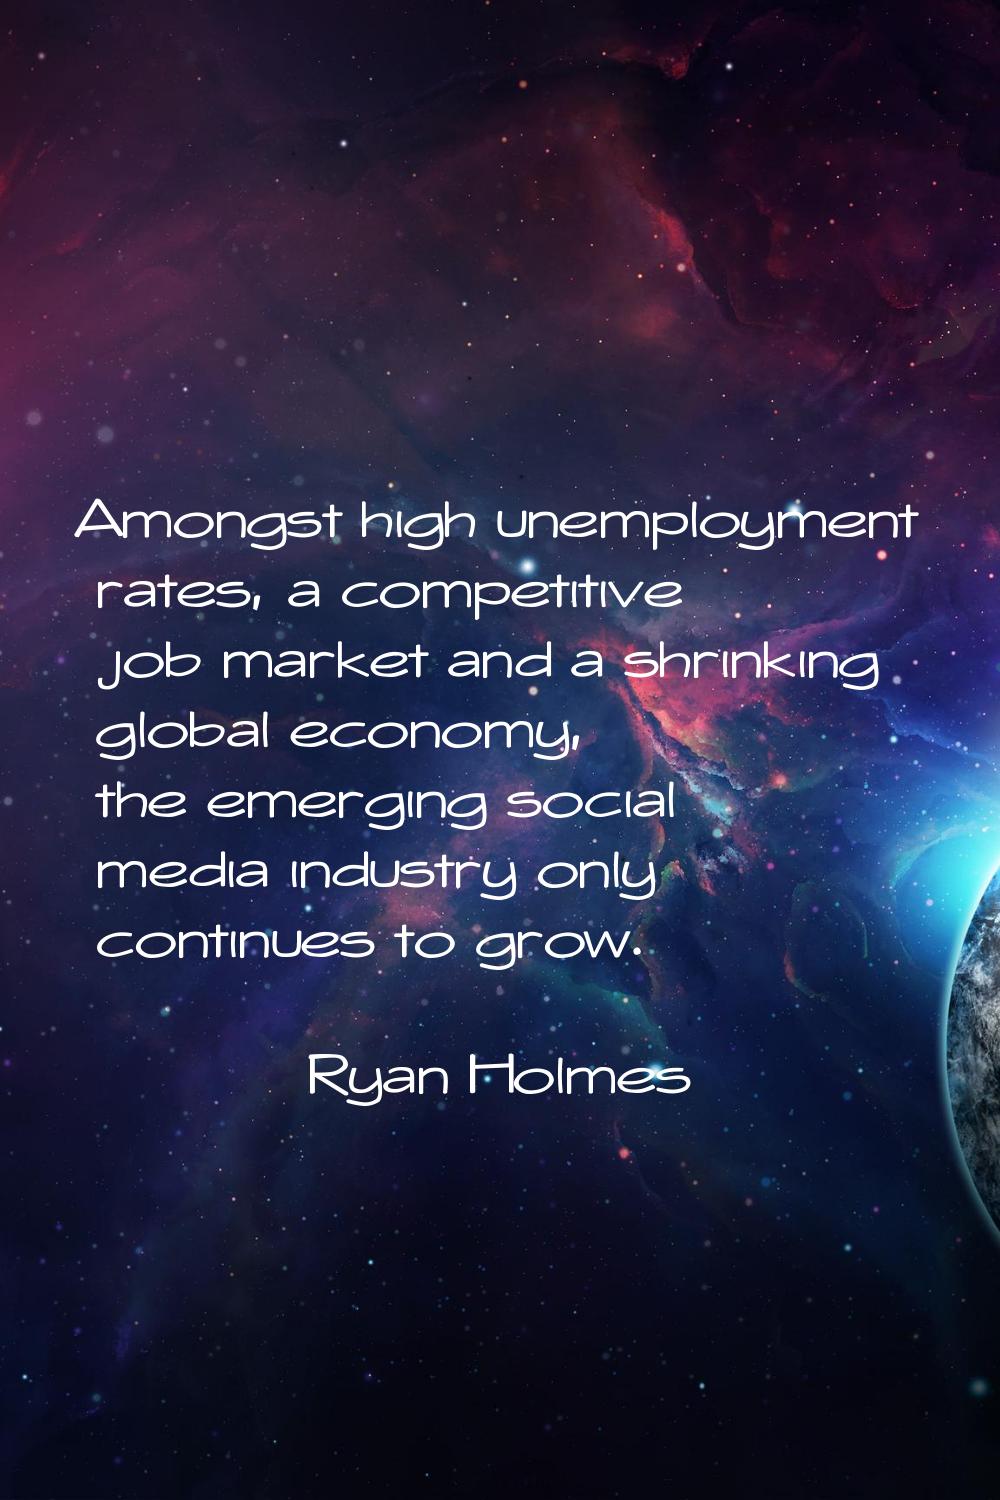 Amongst high unemployment rates, a competitive job market and a shrinking global economy, the emerg